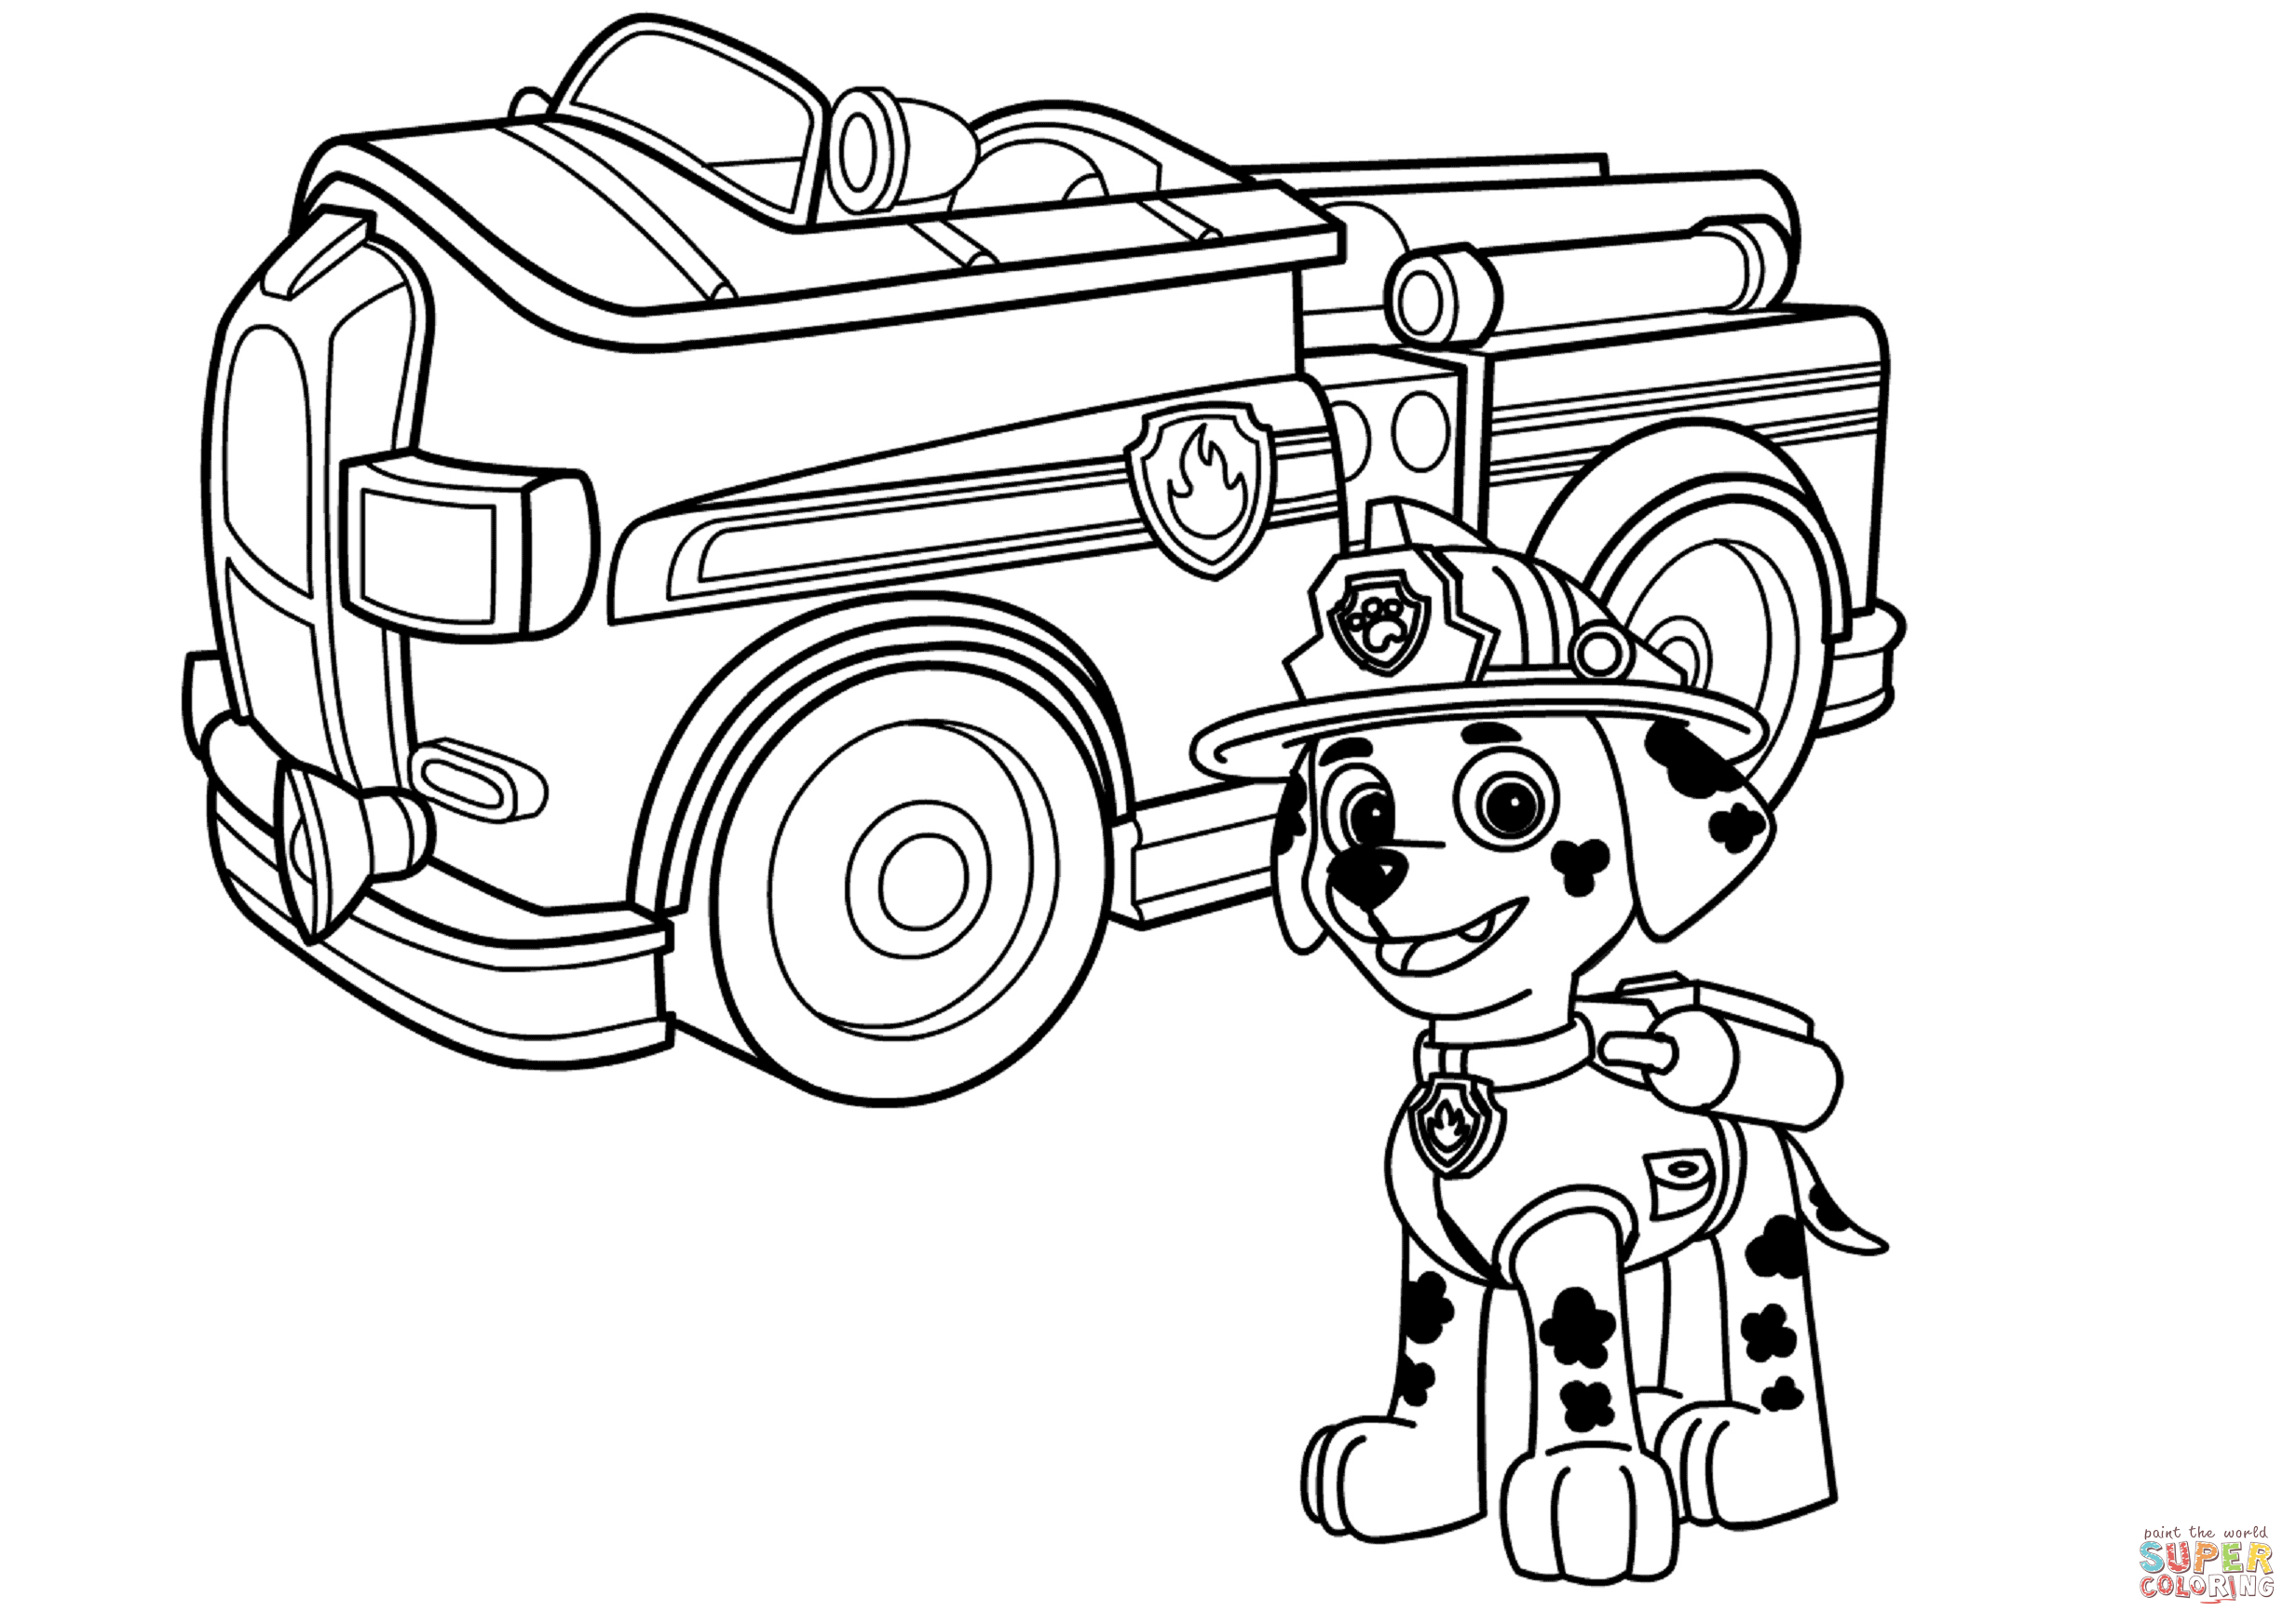 Road Trip Coloring Pages Paw Patrol Vehicles Coloring Pages At Getdrawings Free For